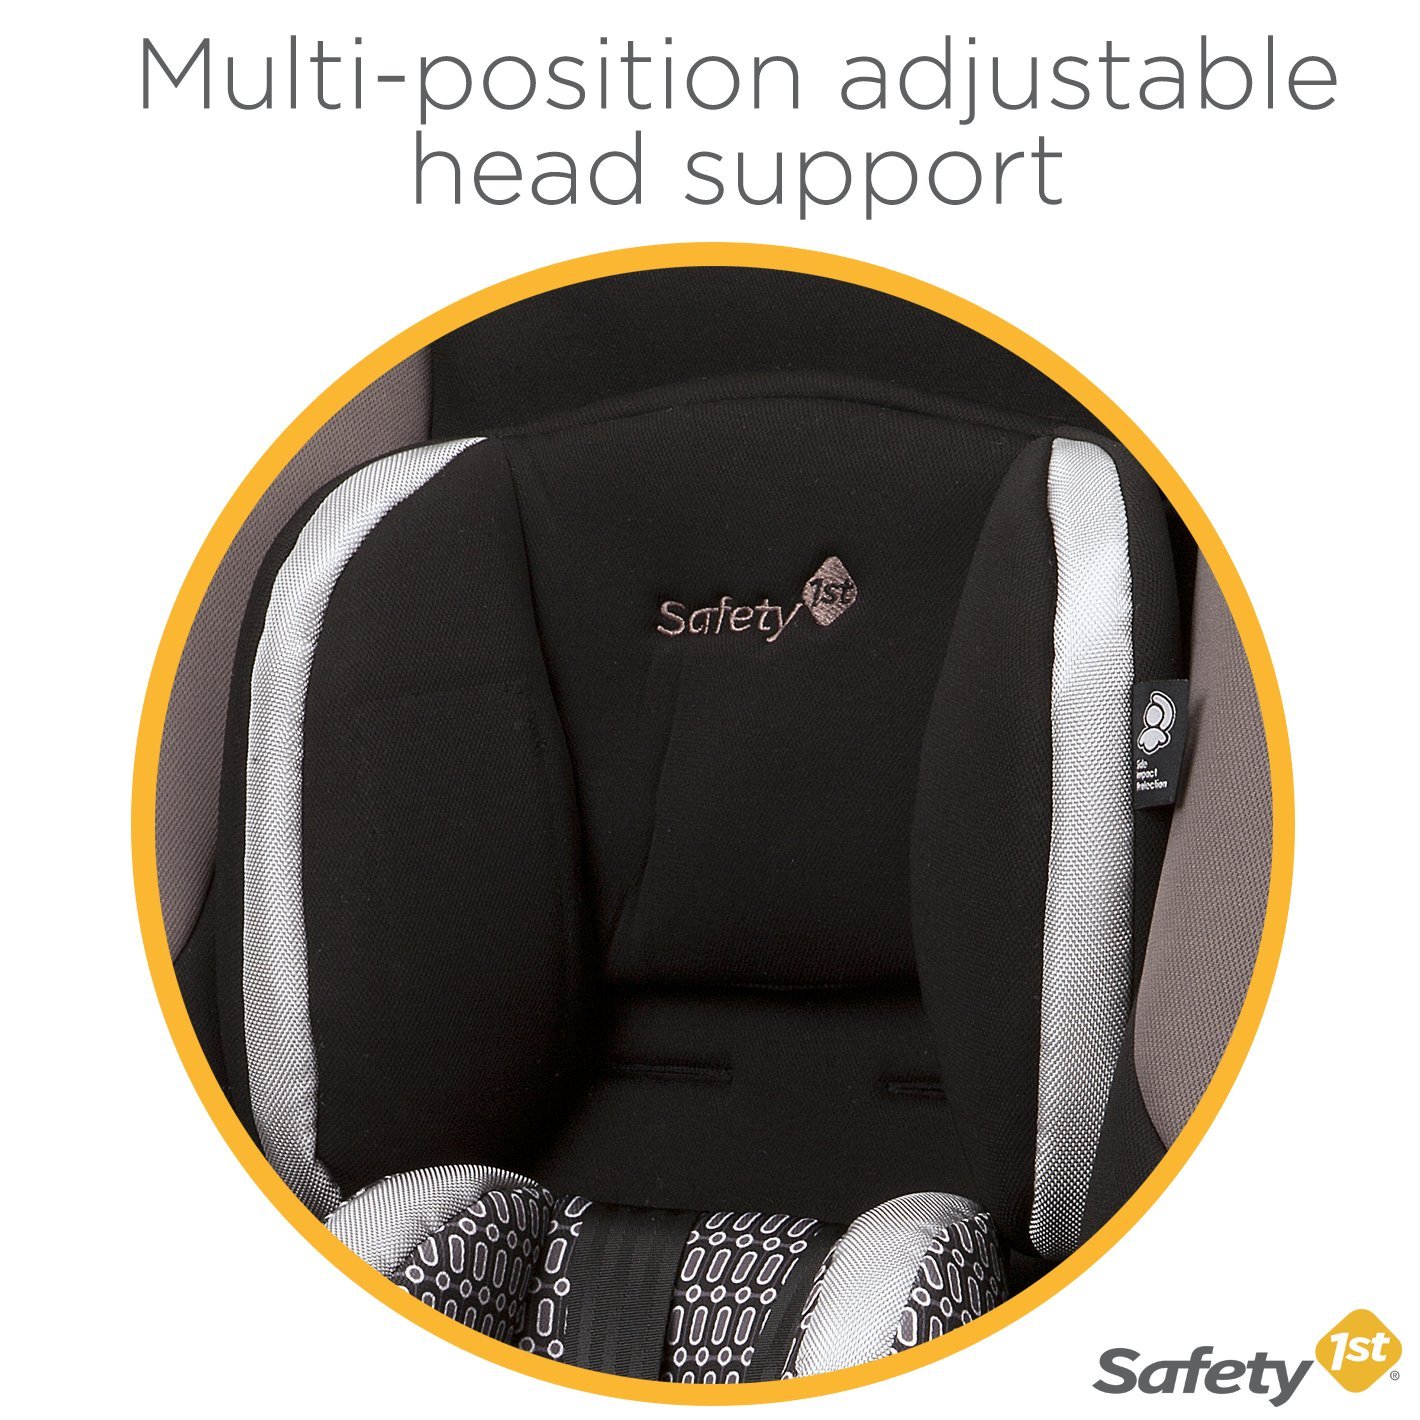 Safety 1st Guide 65 Convertible Car Seat, Chambers